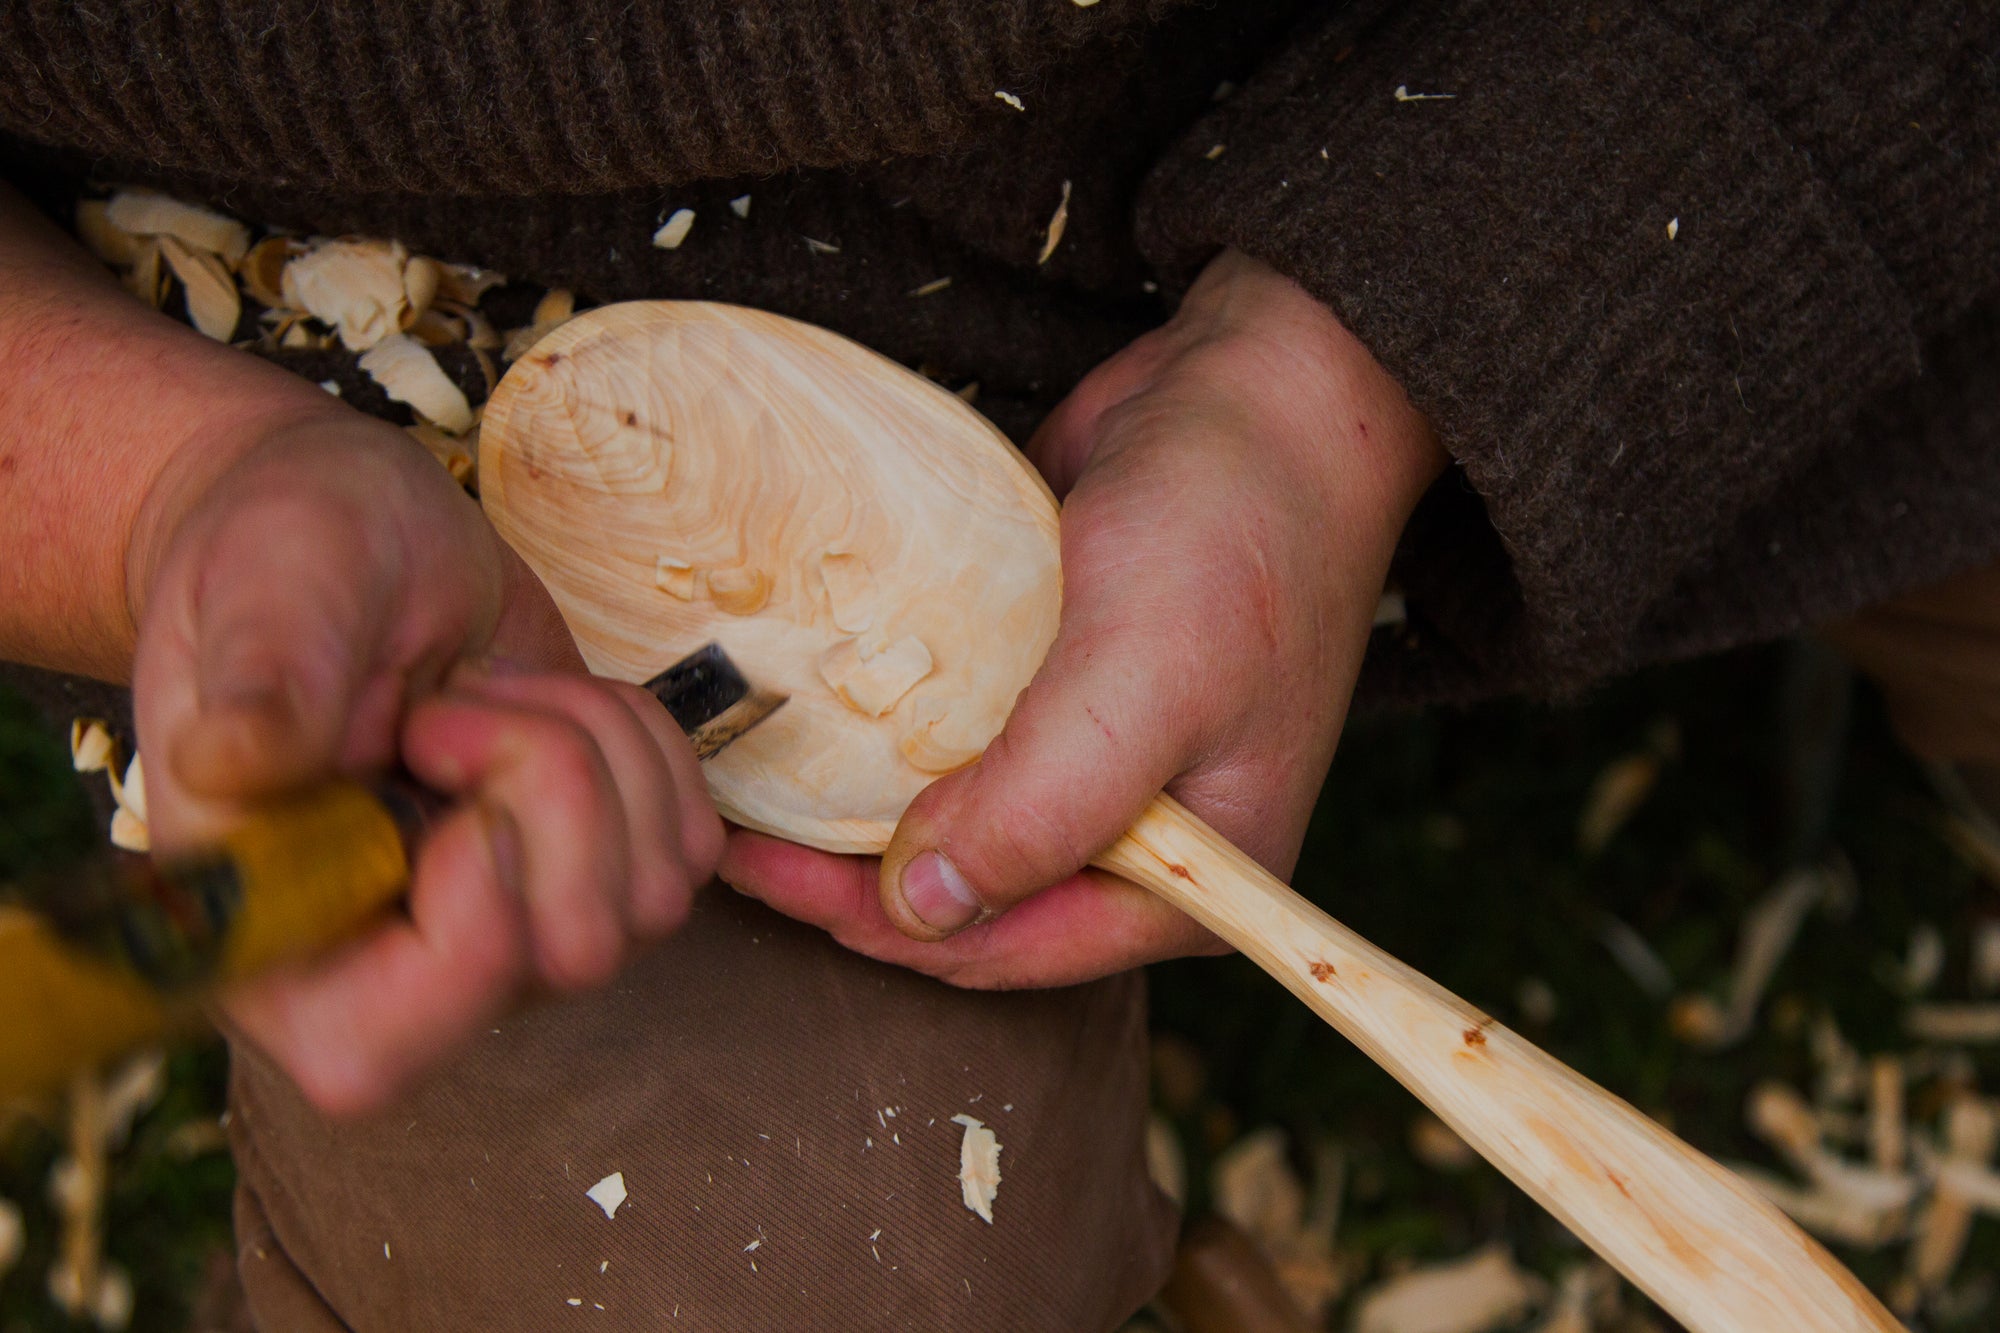 A person is carving a wooden spoon.